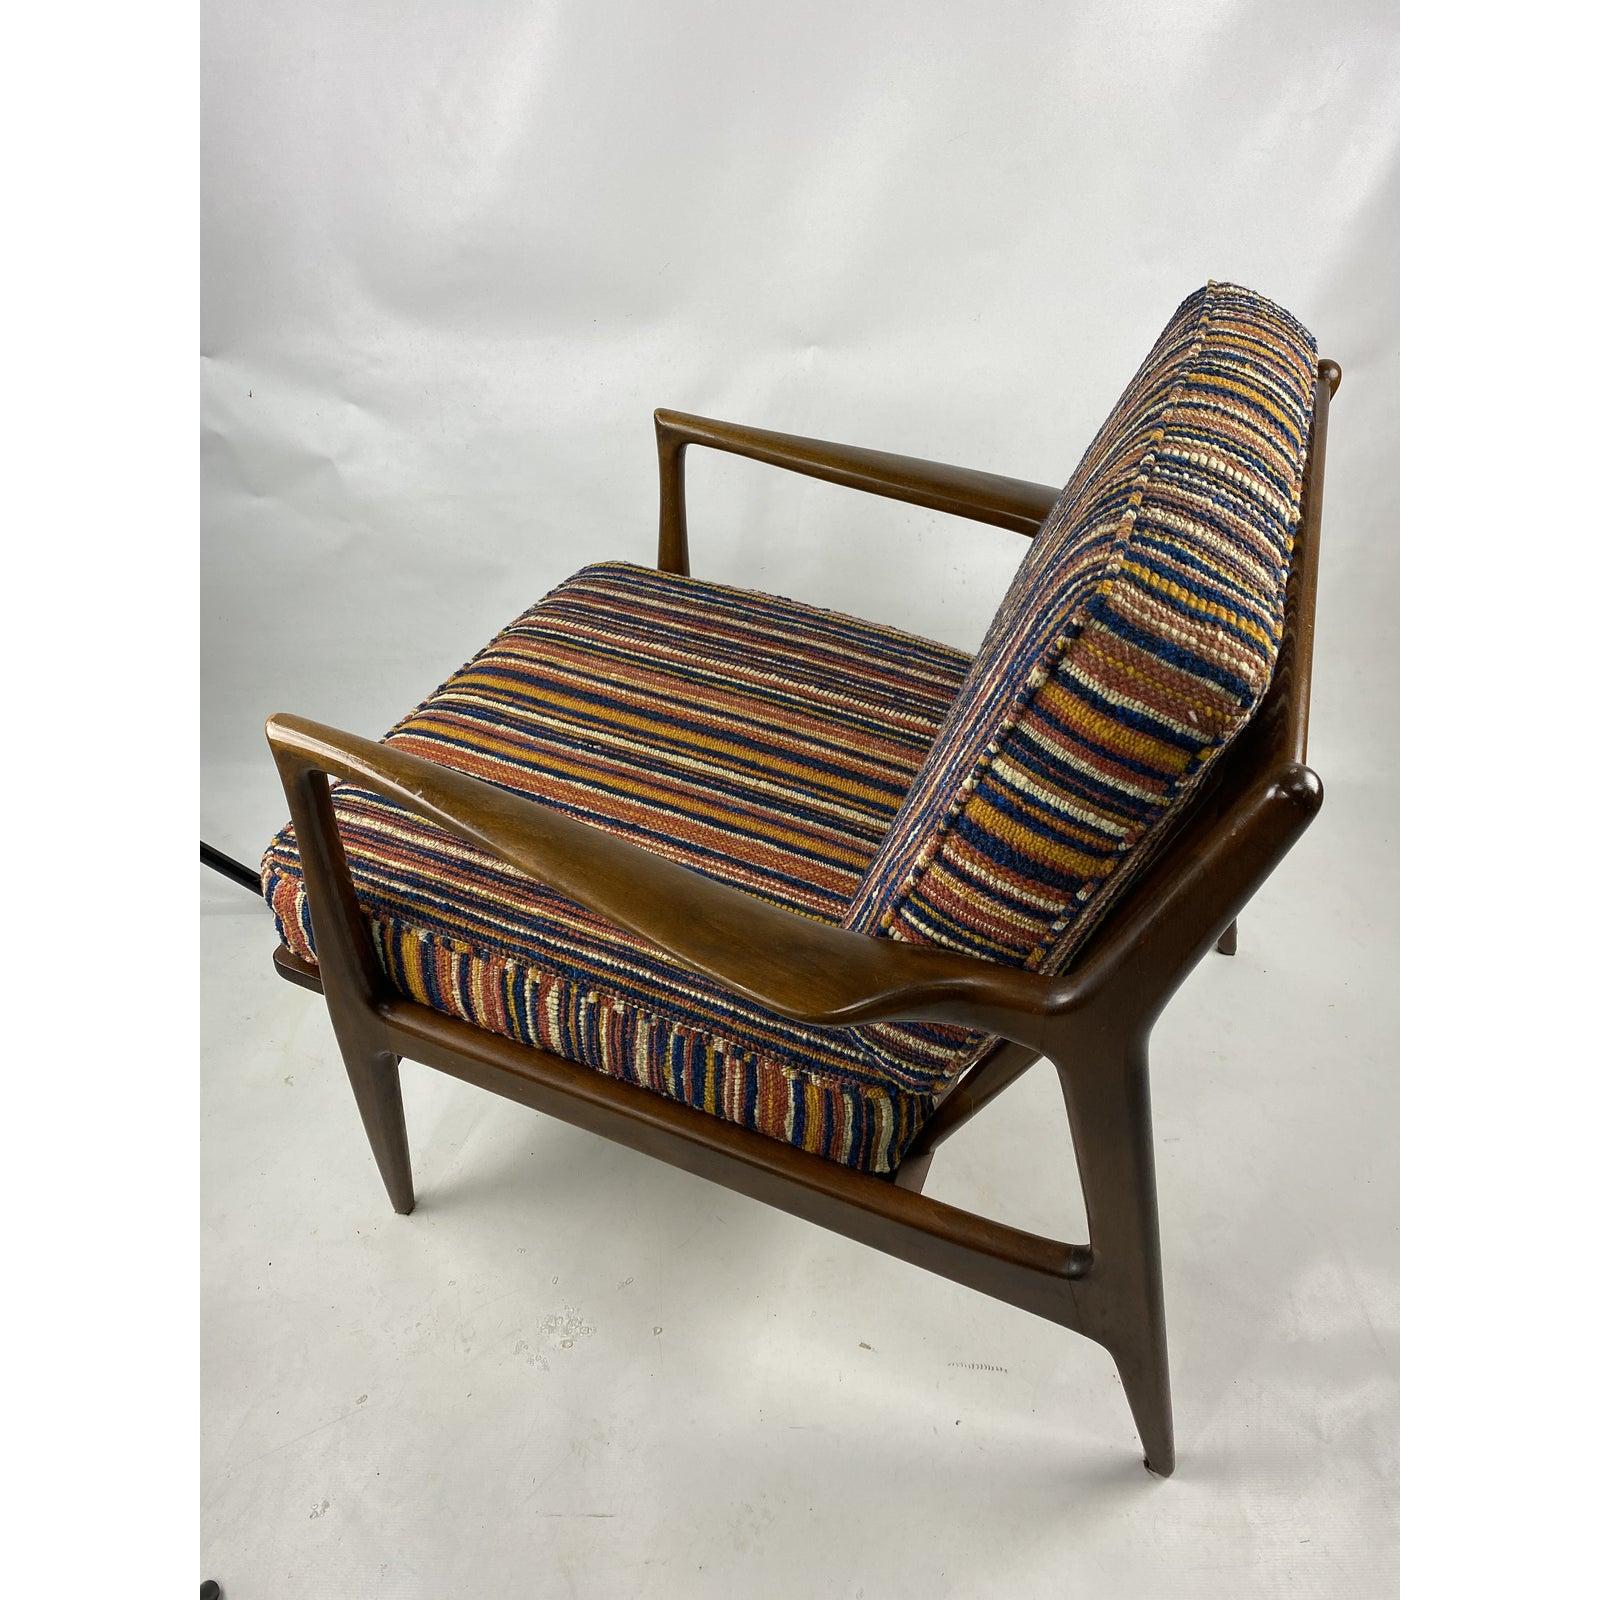 Great mid century solid walnut lounge chair designed by Larsen for selig. The chairs is in great shape and looks great.